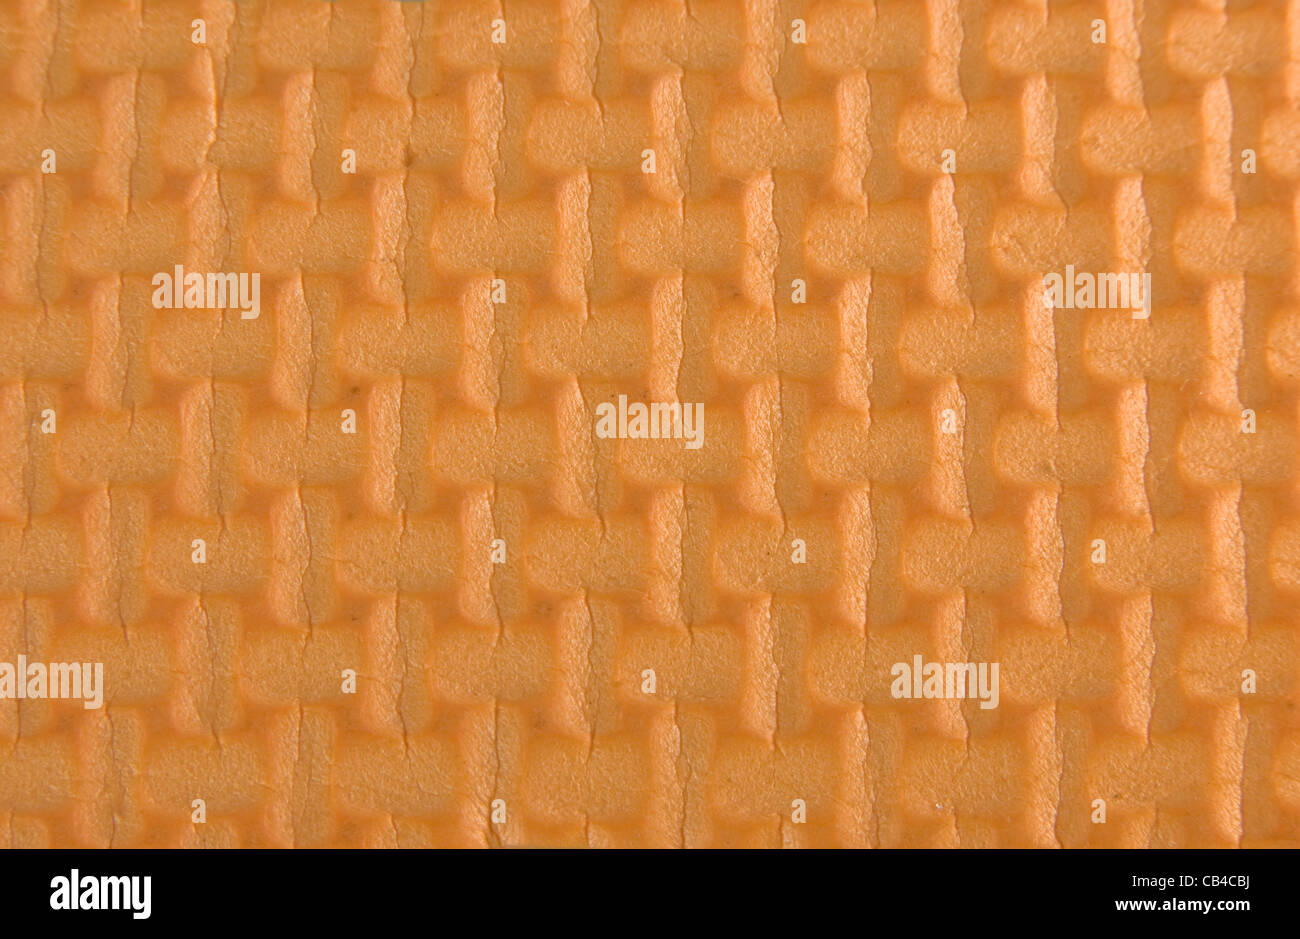 Orange woven rubber texture macro shot. Useful as background for design. Stock Photo